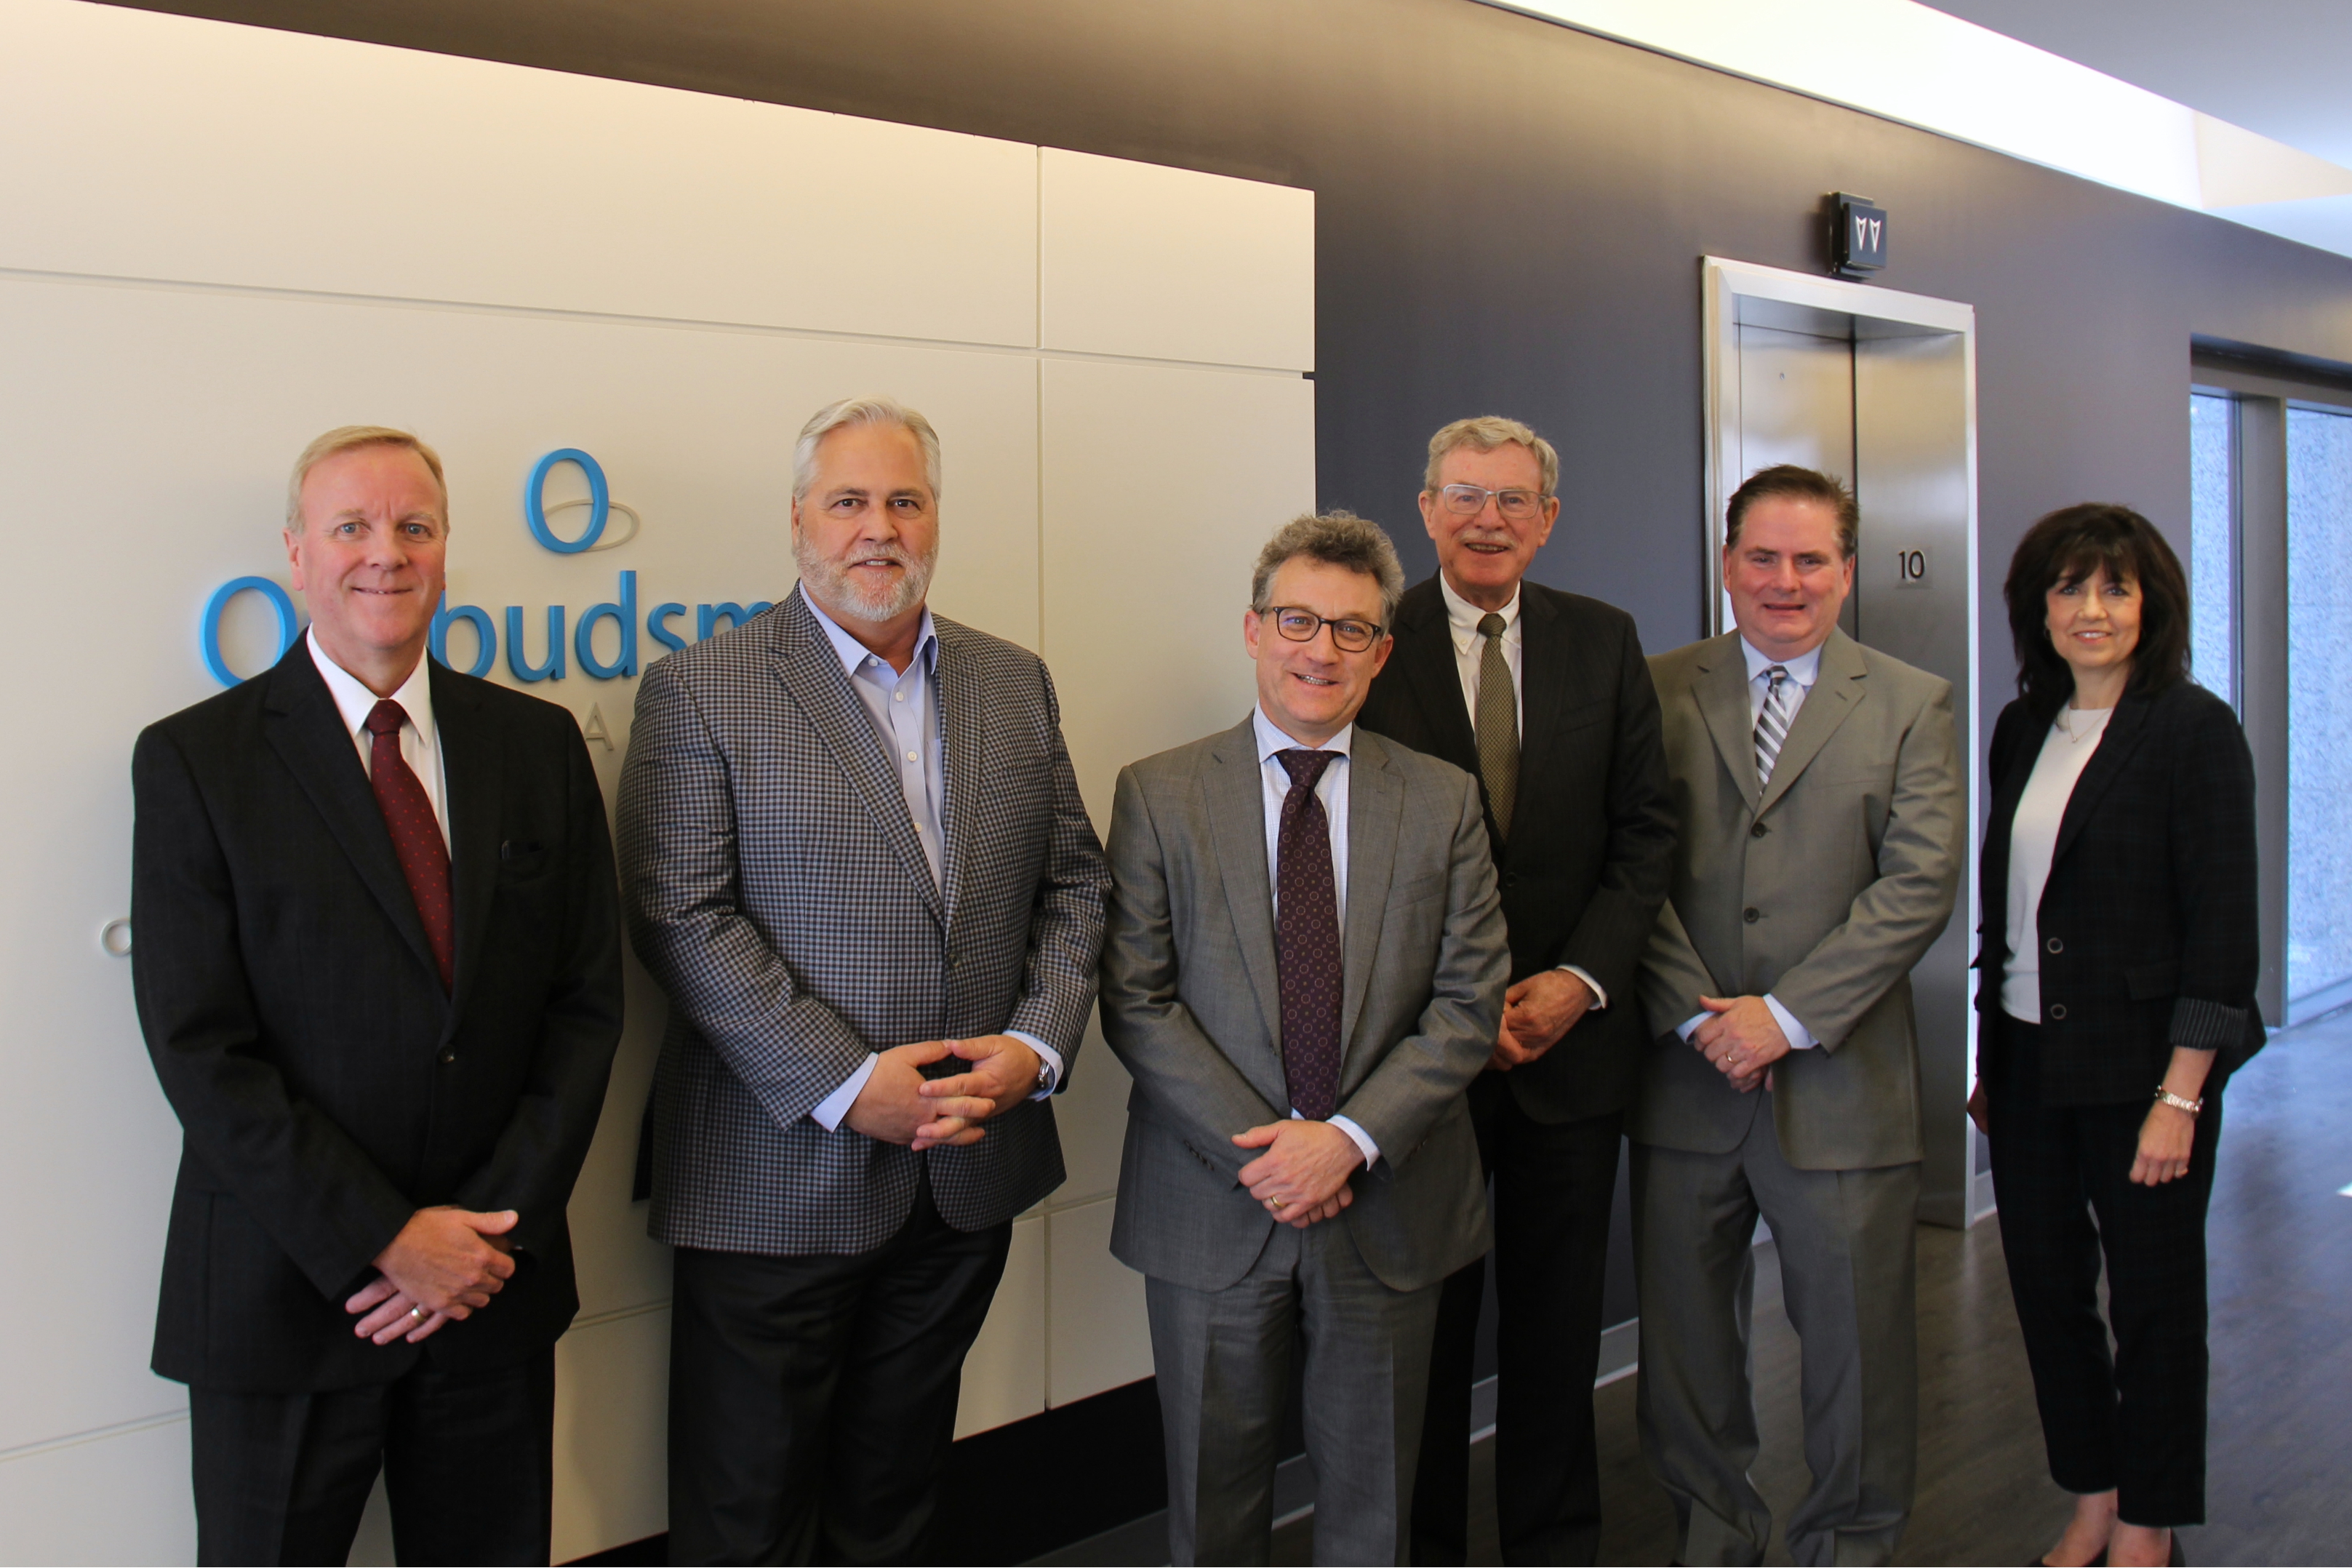 Ombudsman Paul Dubé meets with his fellow Officers of the Ontario Legislature at our Office. Left to right: Todd Decker, Clerk of the Legislature; Ombudsman Dubé; Peter Weltman, Financial Accountability Officer; David Wake, Integrity Commissioner; Greg Essensa, Chief Electoral Officer; Bonnie Lysyk, Auditor General.